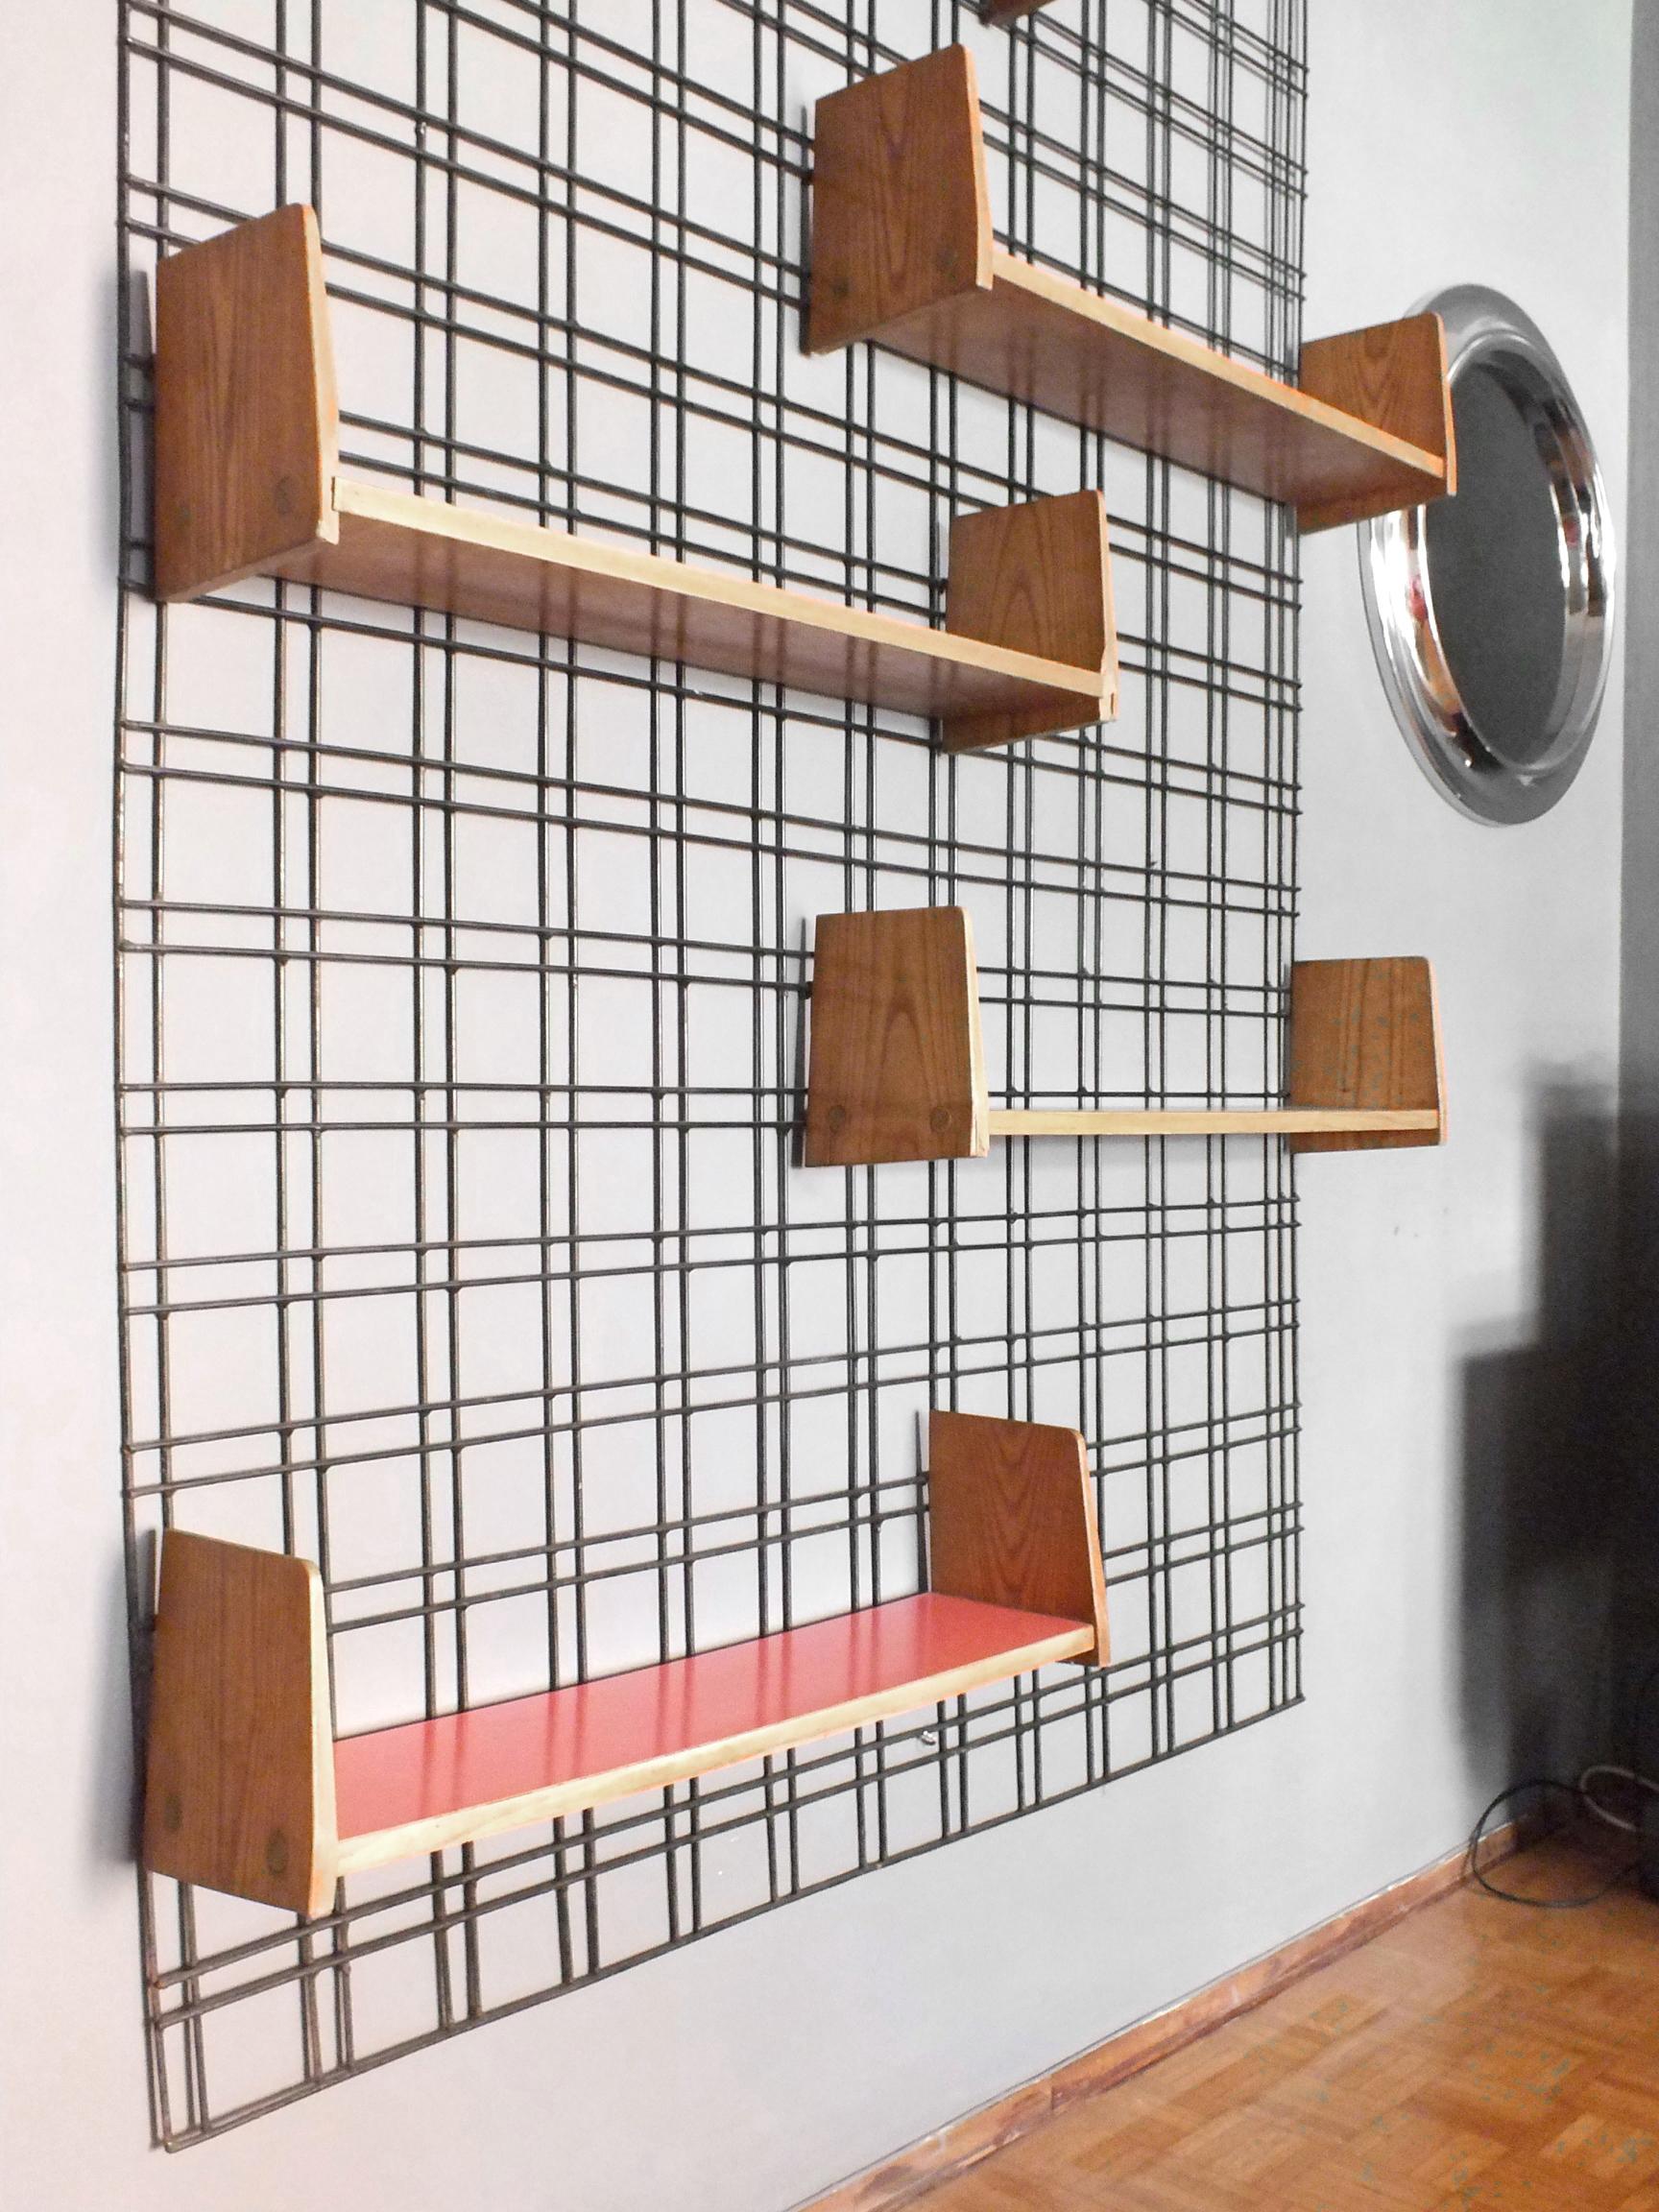 Vintage Wall Mounted Shelving by Pfr Studio Gio Ponti 1950 In Good Condition For Sale In Biella, IT